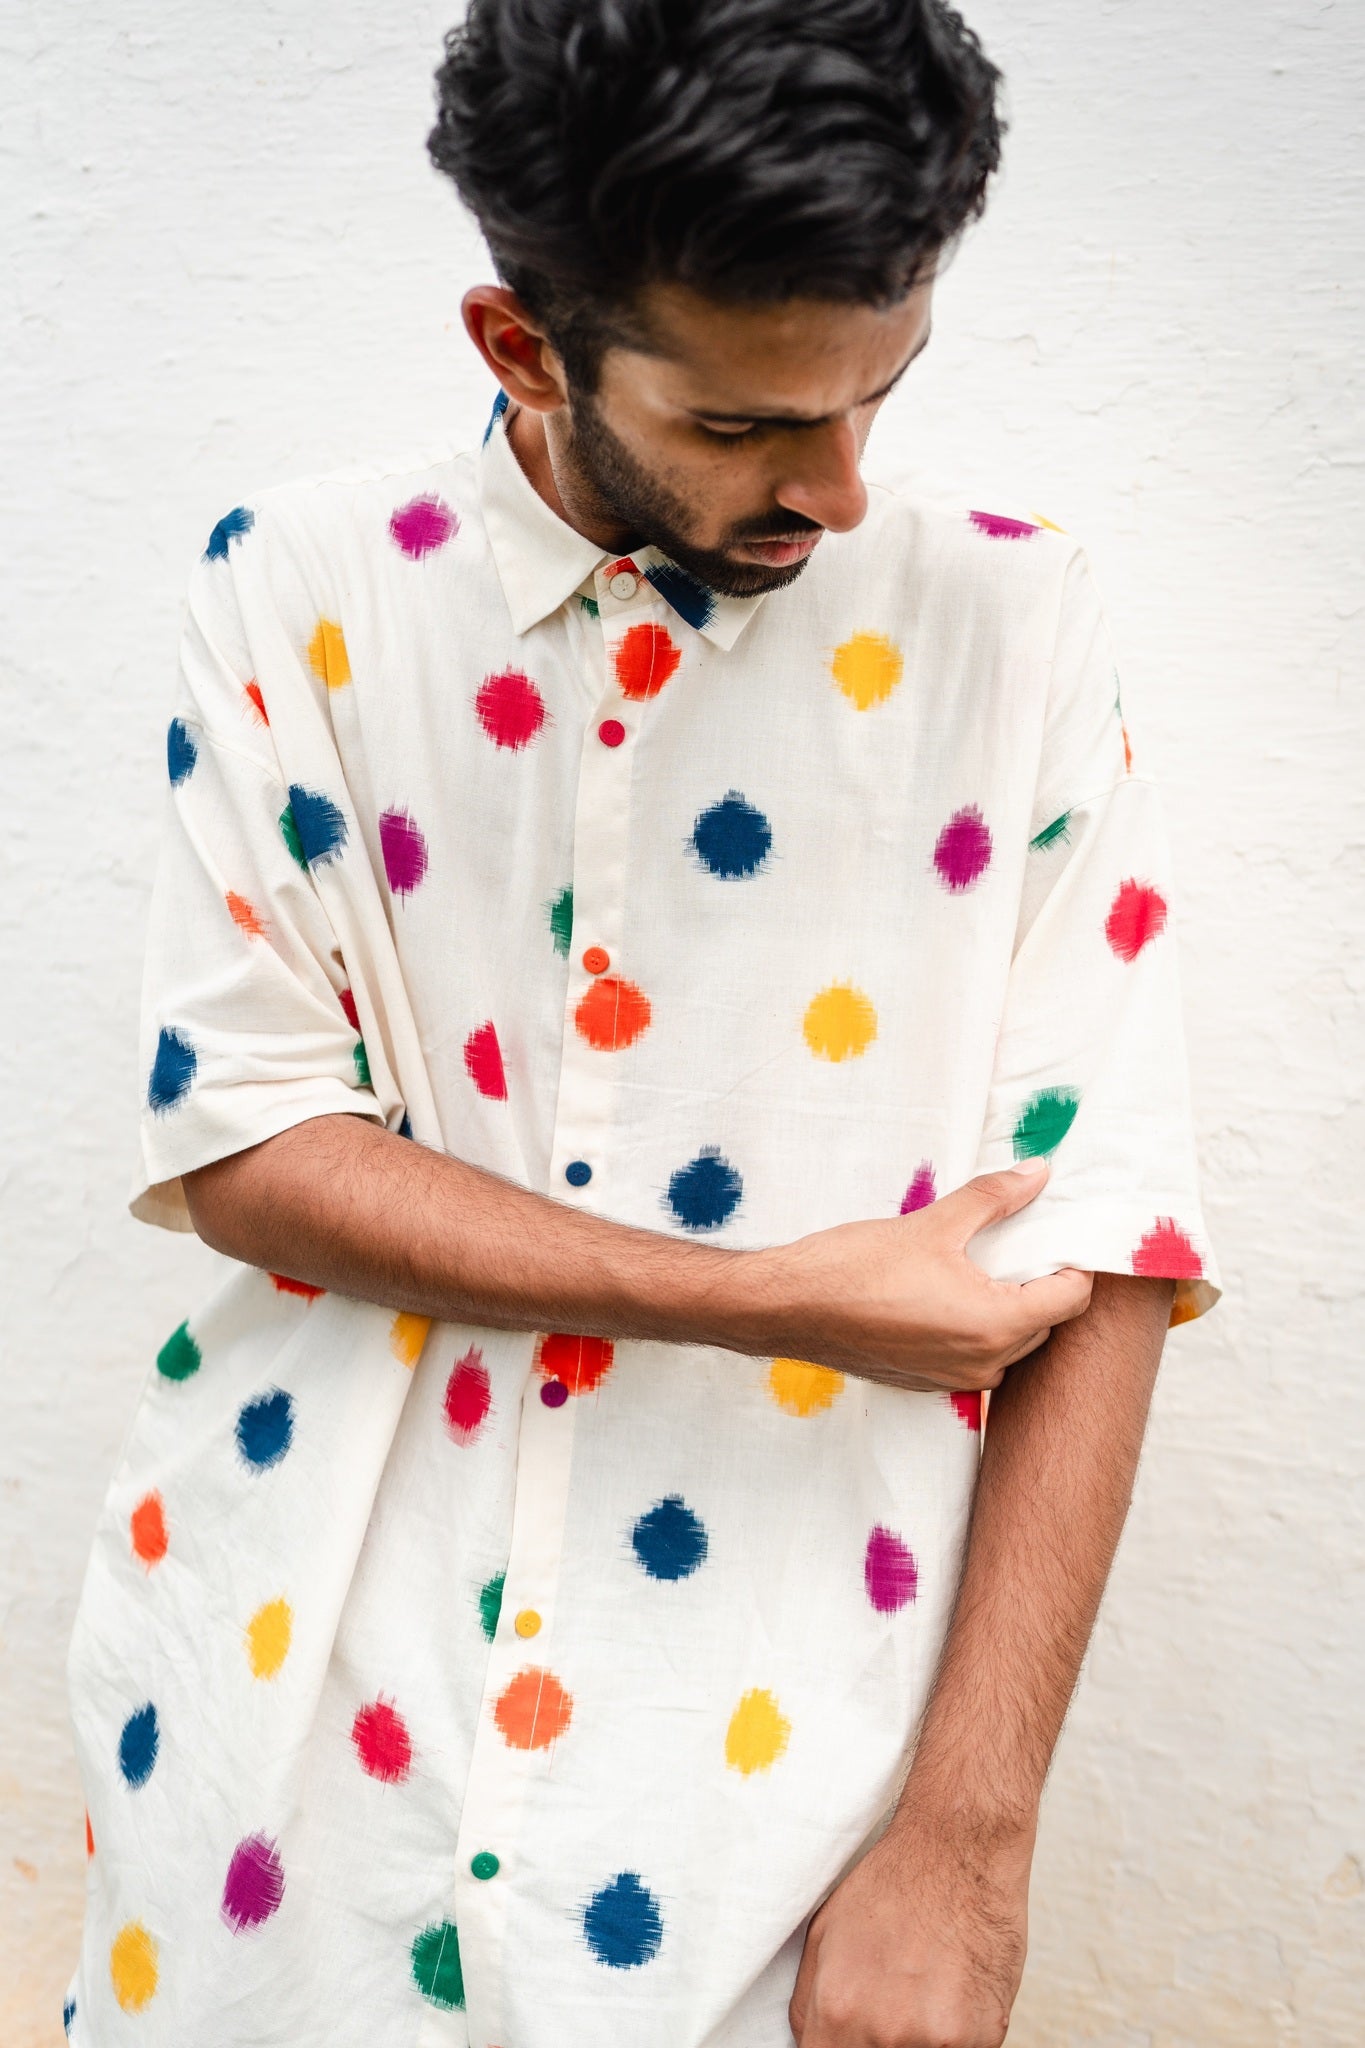 Rangeela Men's Polka Shirt, handwoven from breathable cotton, boasts lasting vibrant colors from special dyeing. Relish traditional craftsmanship in classic style.